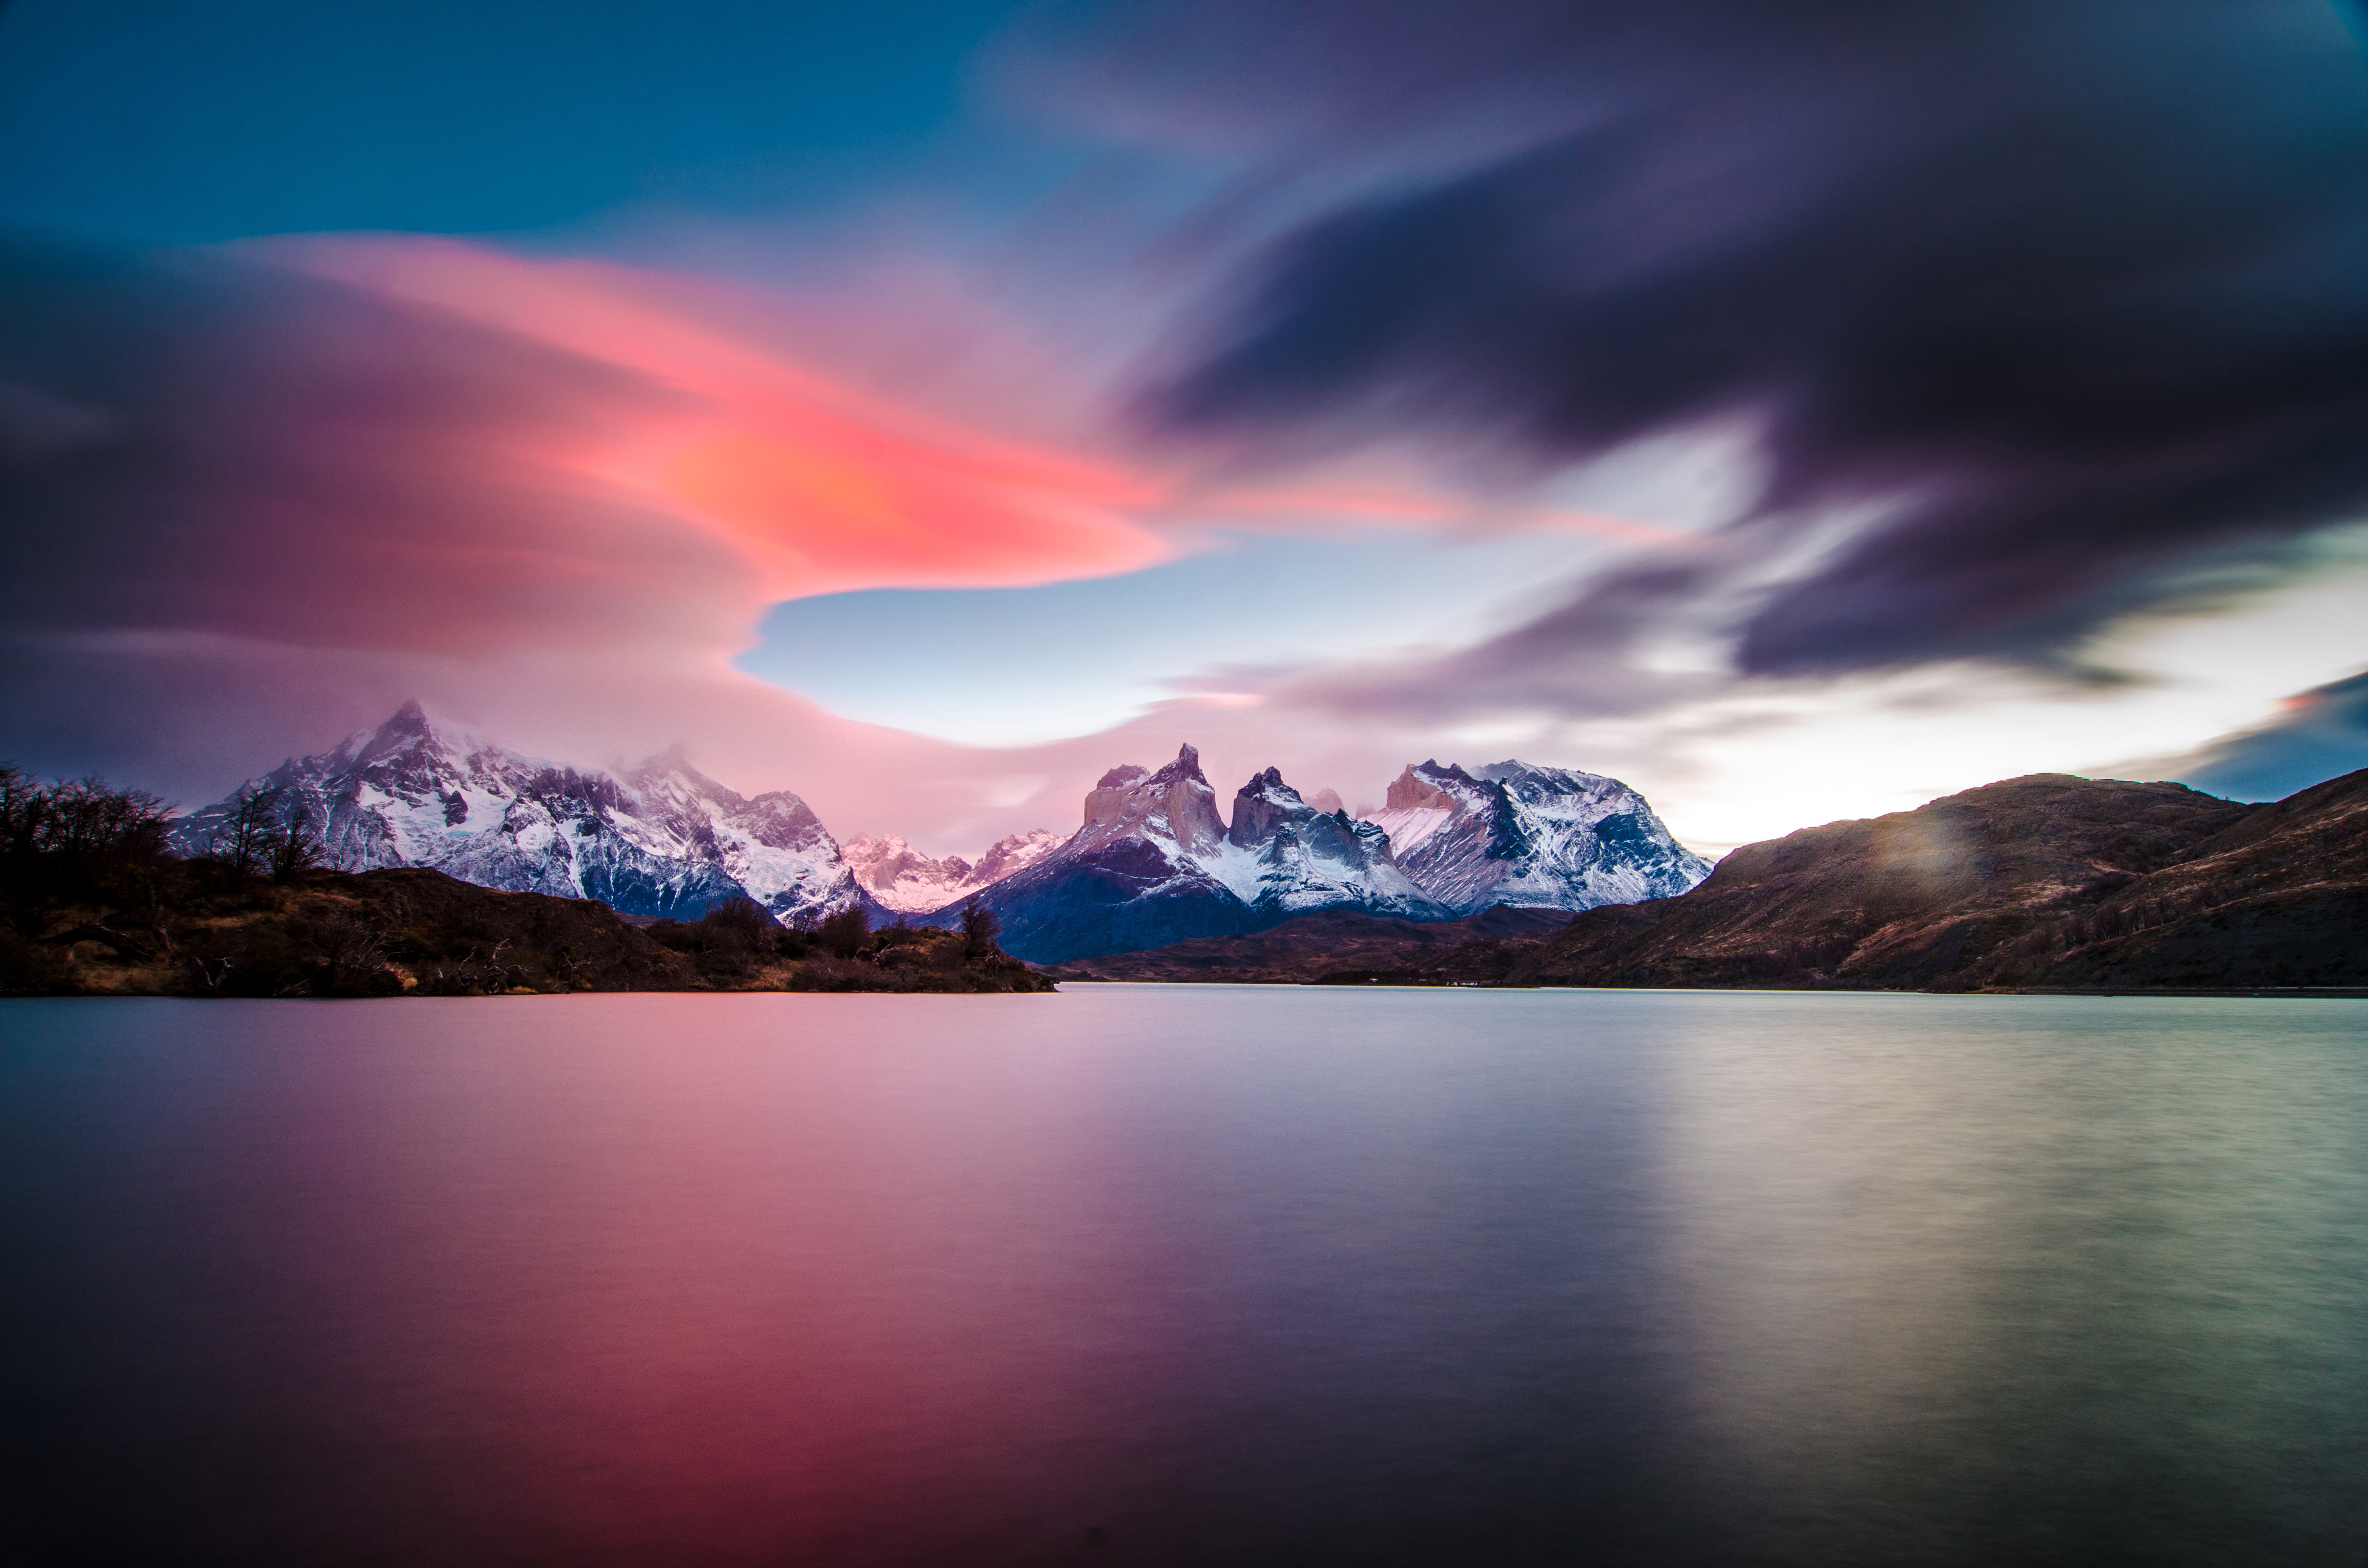 The Horns of Paine / Los Cuernos del Paine